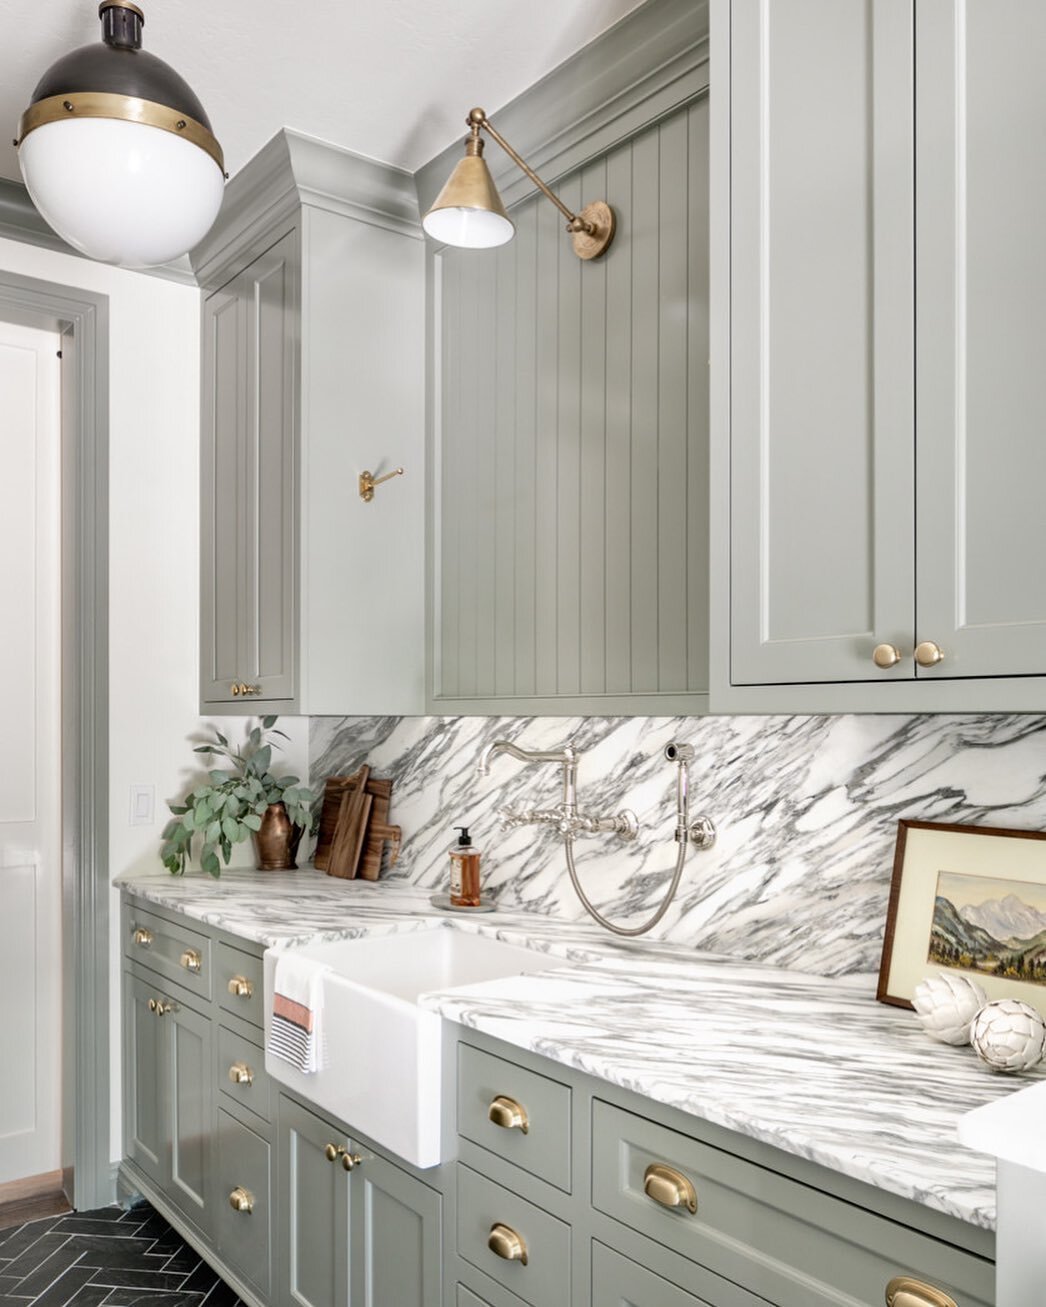 We always love a good before and after to really show you how we work our magic on outdated spaces...look at our stories to see this laundry room in all its glory before we got our hands on it! ⠀
Design: @browninteriorsinc⠀
Photo: @emilyhartphoto⠀
⠀
